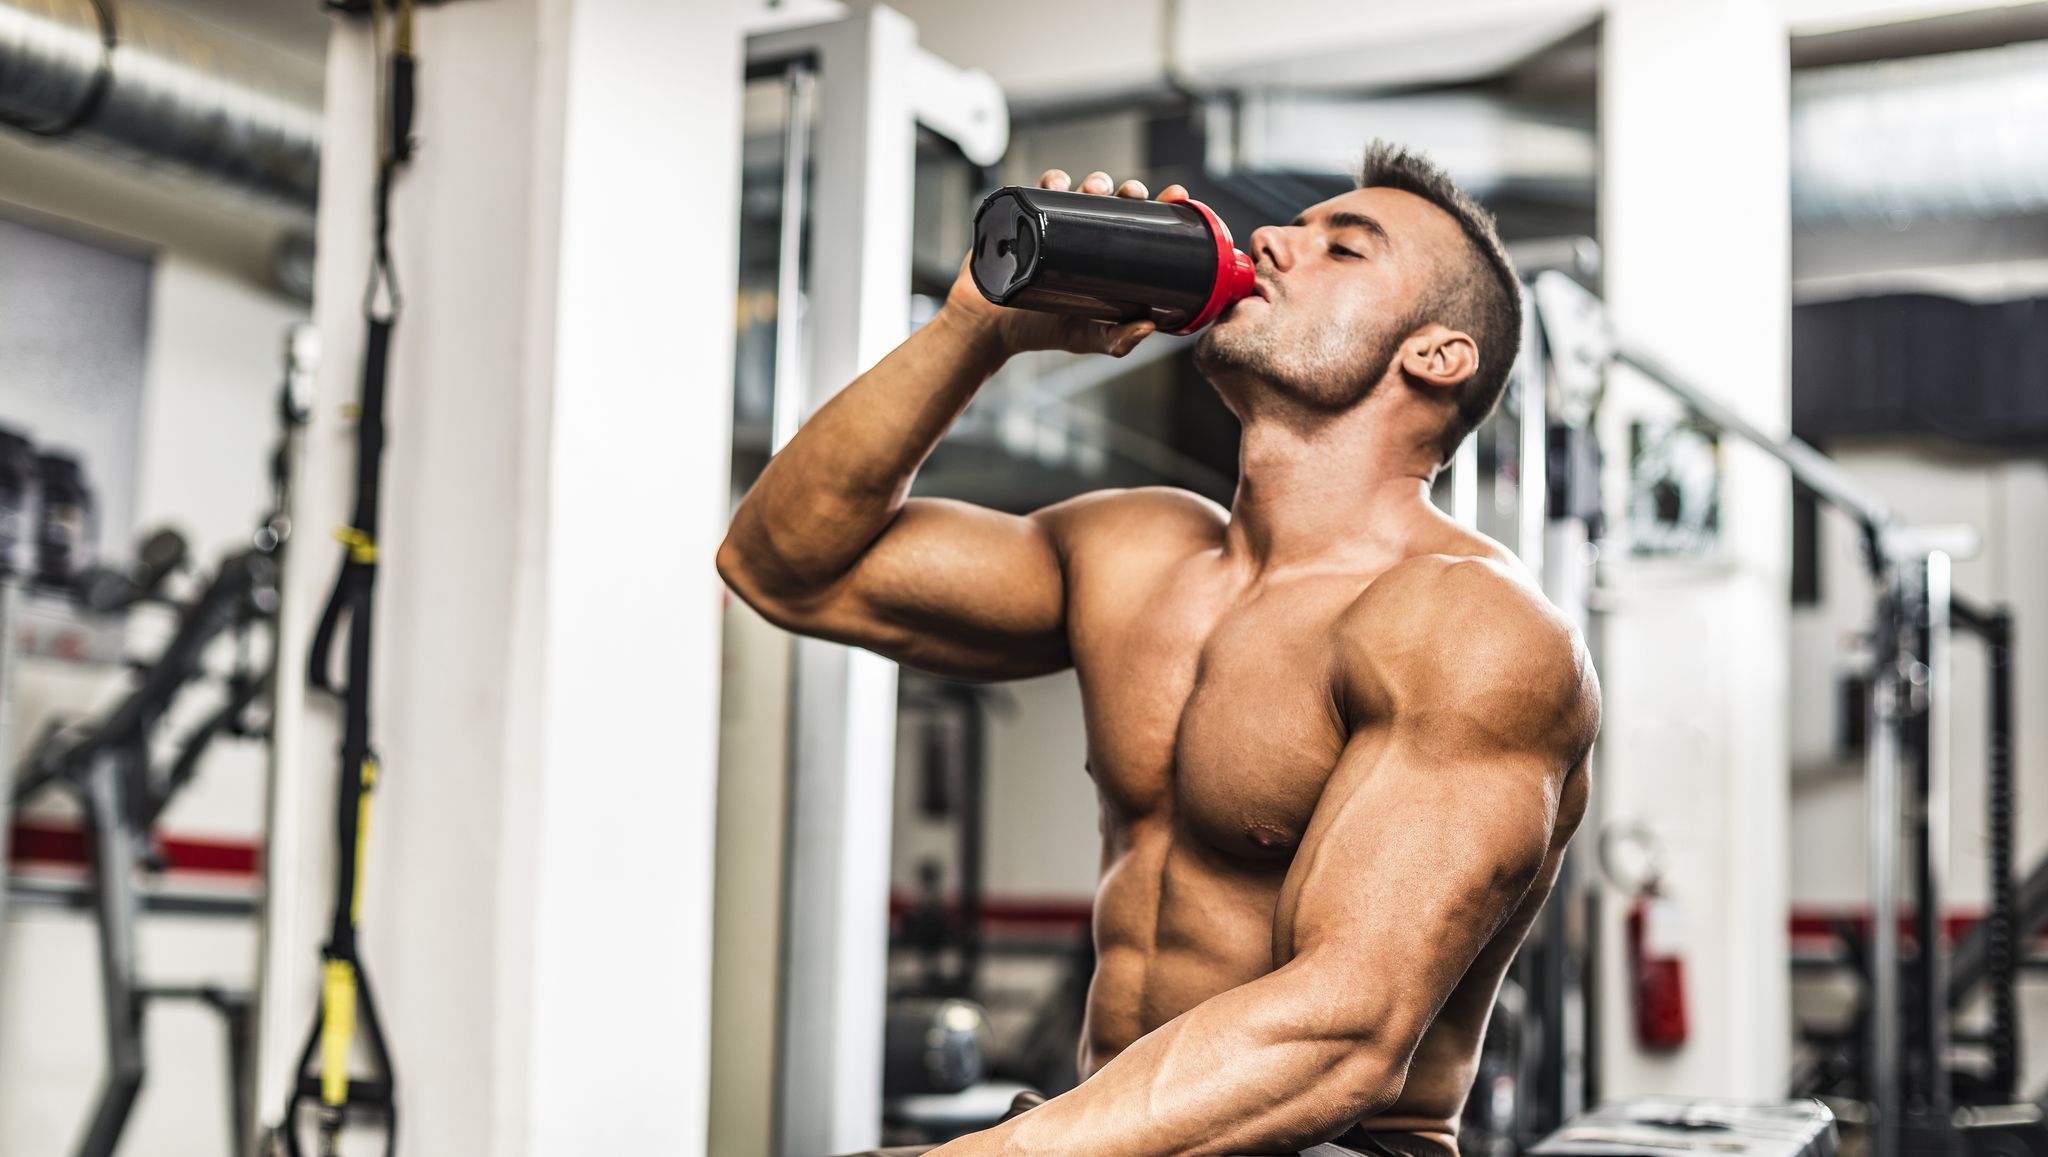 https://hips.hearstapps.com/hmg-prod/images/young-man-drinking-his-proteins-at-the-gym-royalty-free-image-618752690-1546450244.jpg?crop=1.00xw:0.847xh;0,0.0725xh&resize=2048:*